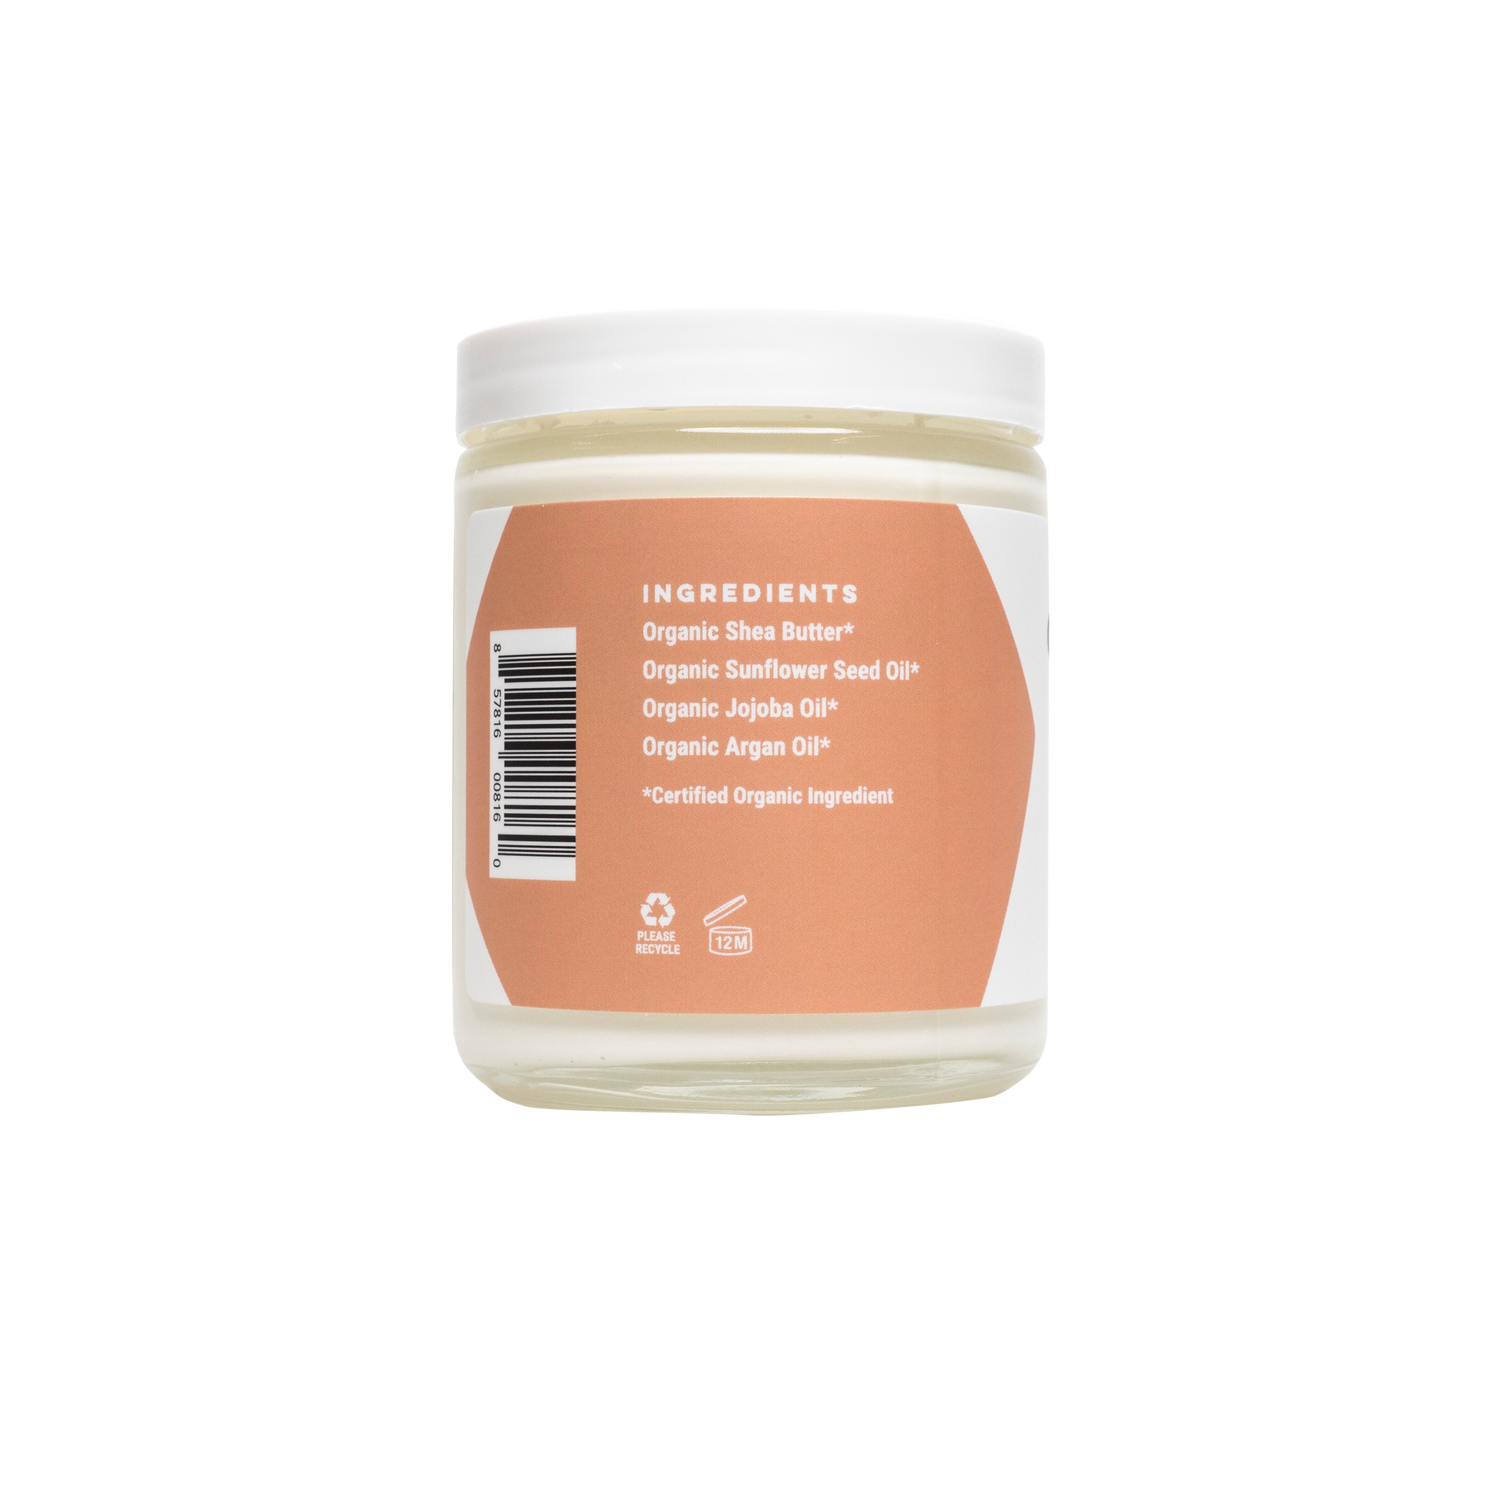 Organic Bath Co Naked Organic Body Butter - NEW PACKAGING! - AILLEA